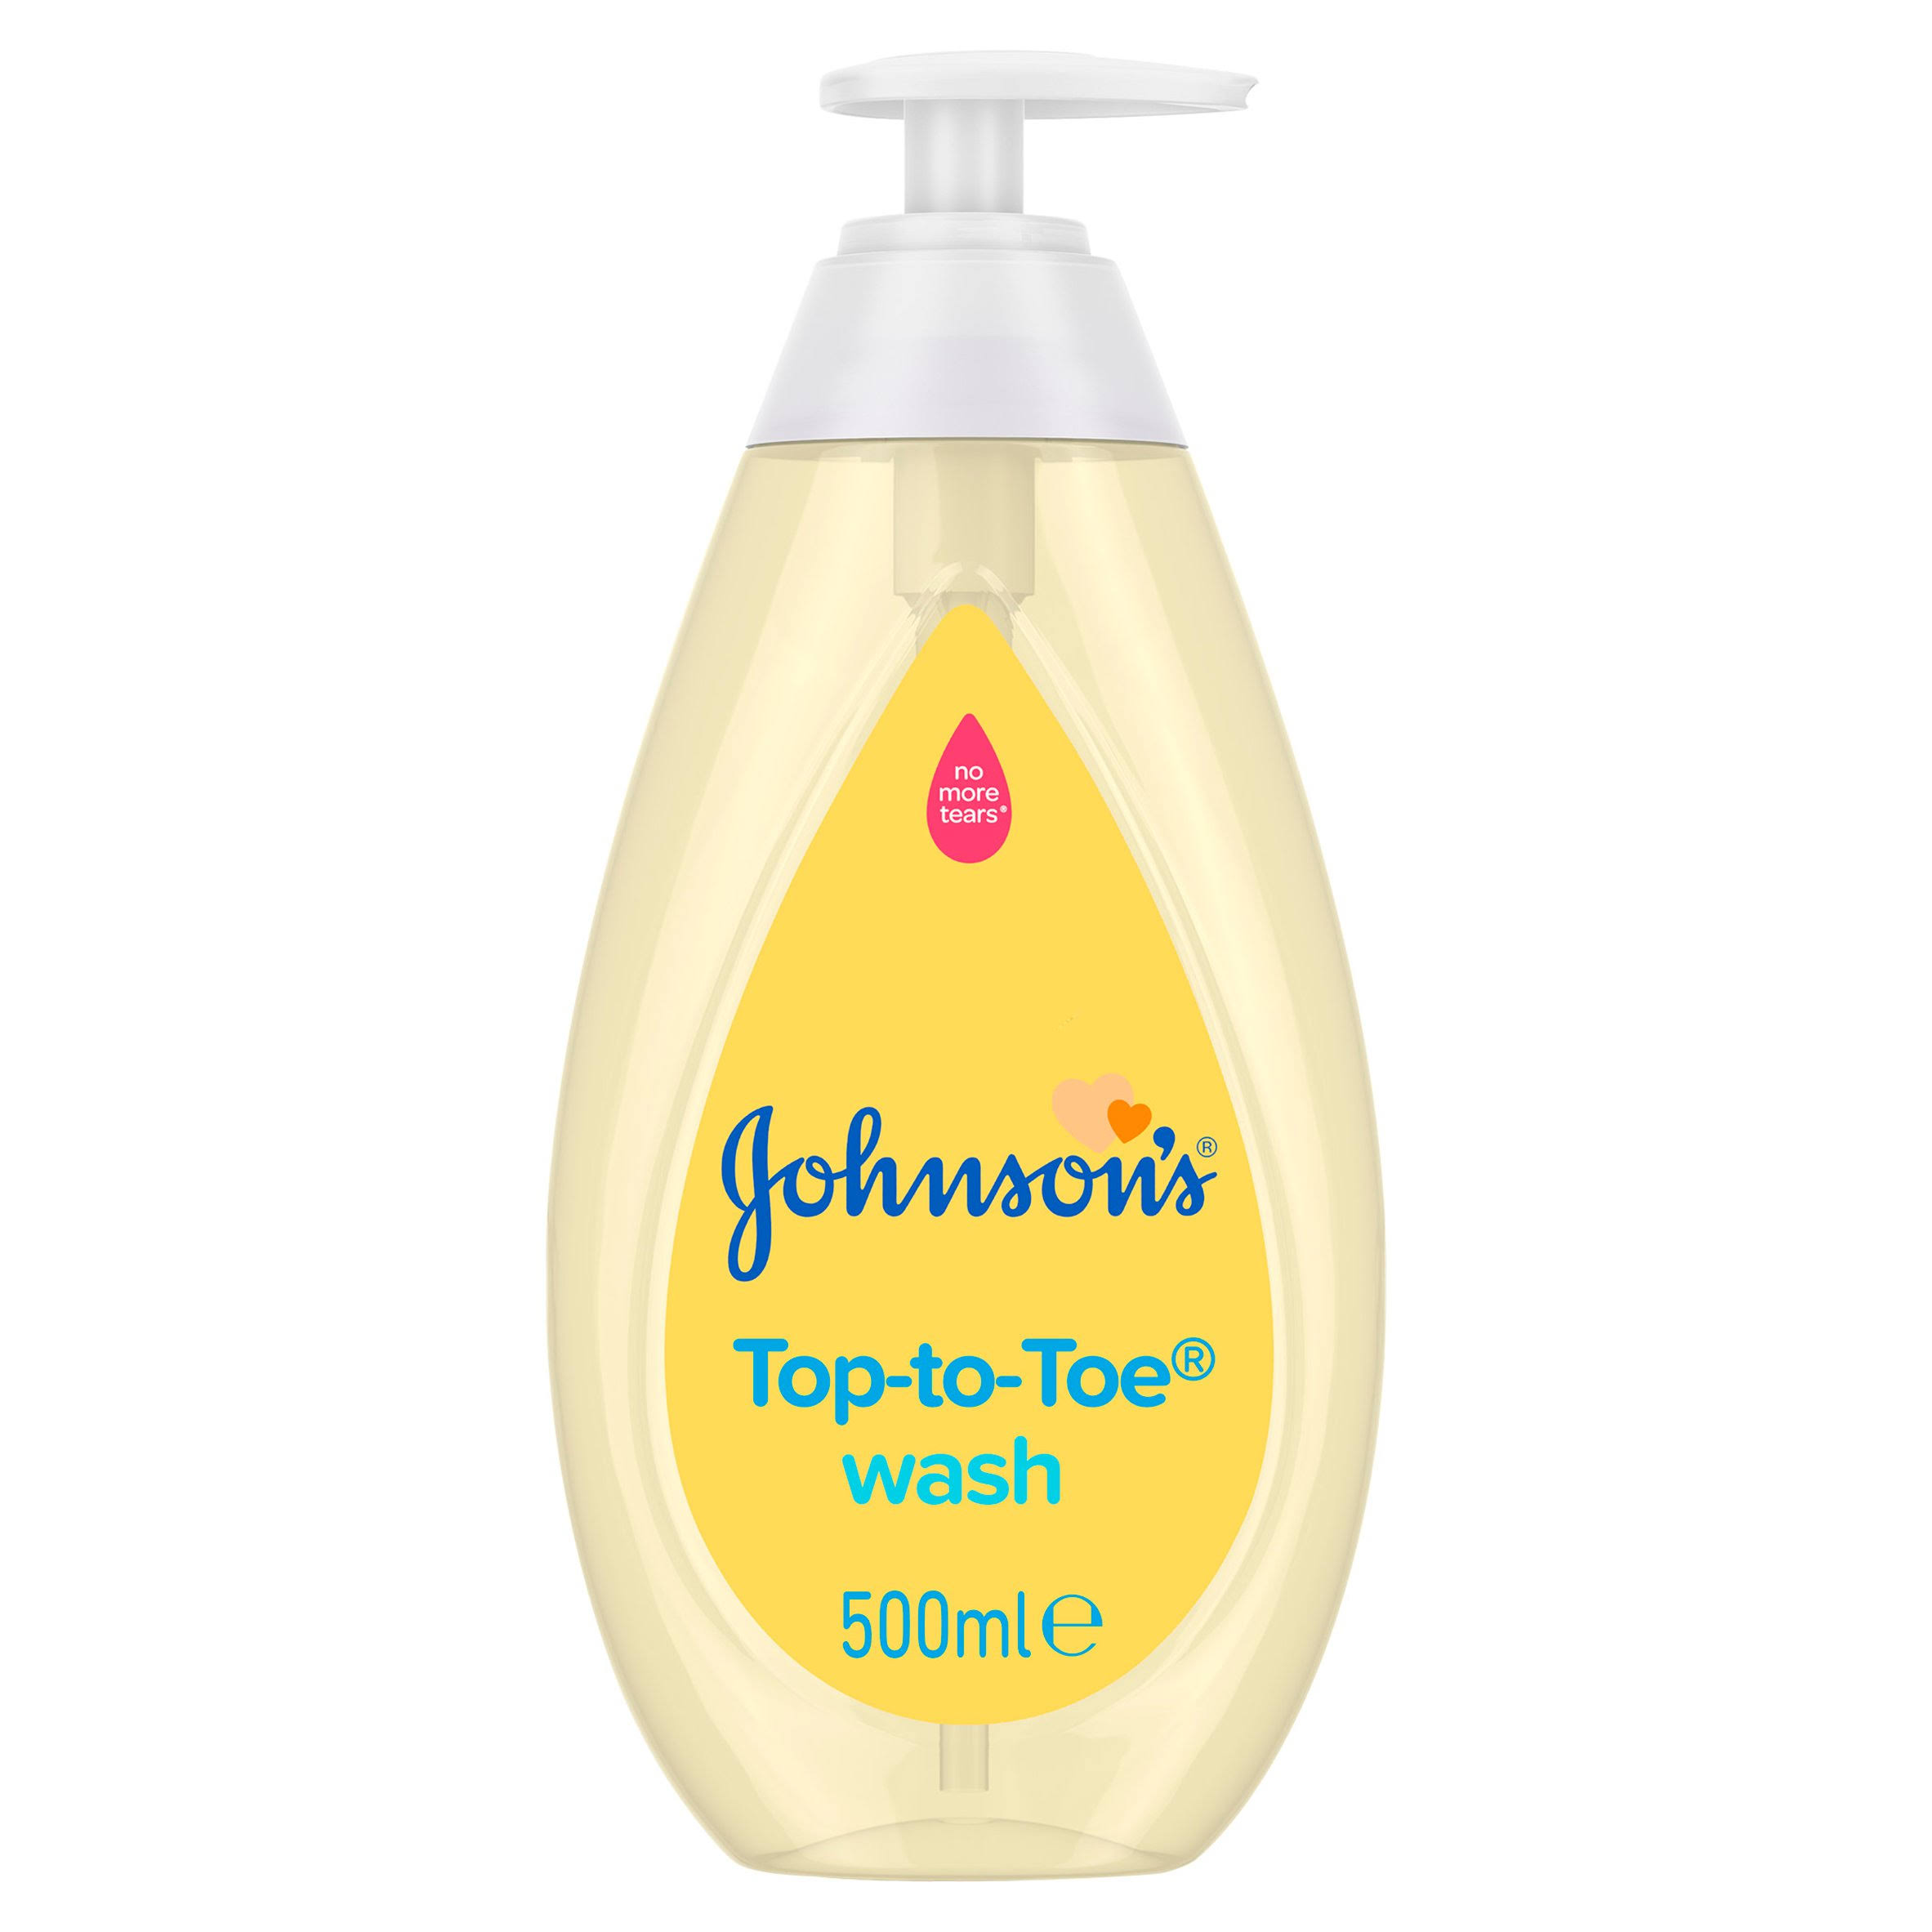 Johnson's Baby Top-To-Toe Wash 500ml – Formulated for Newborn's Delicate Skin